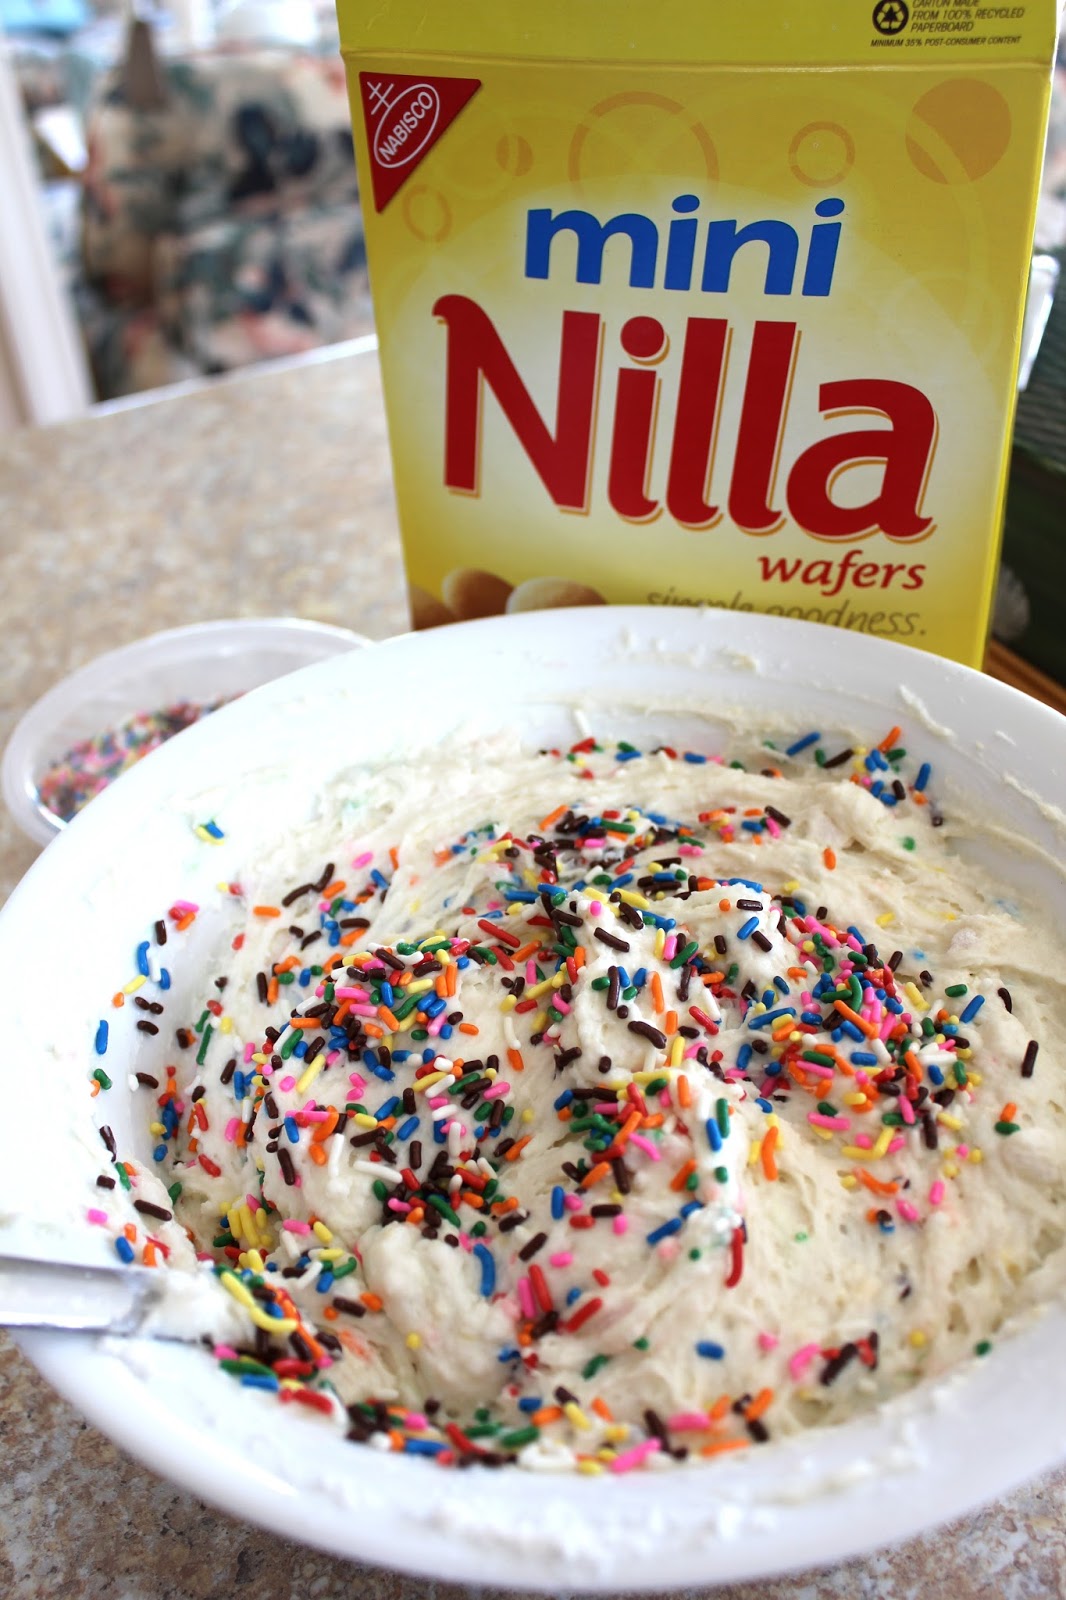 A Busy Working Woman Finds Time to Cook!: Funfetti Cake Batter Dip1066 x 1600